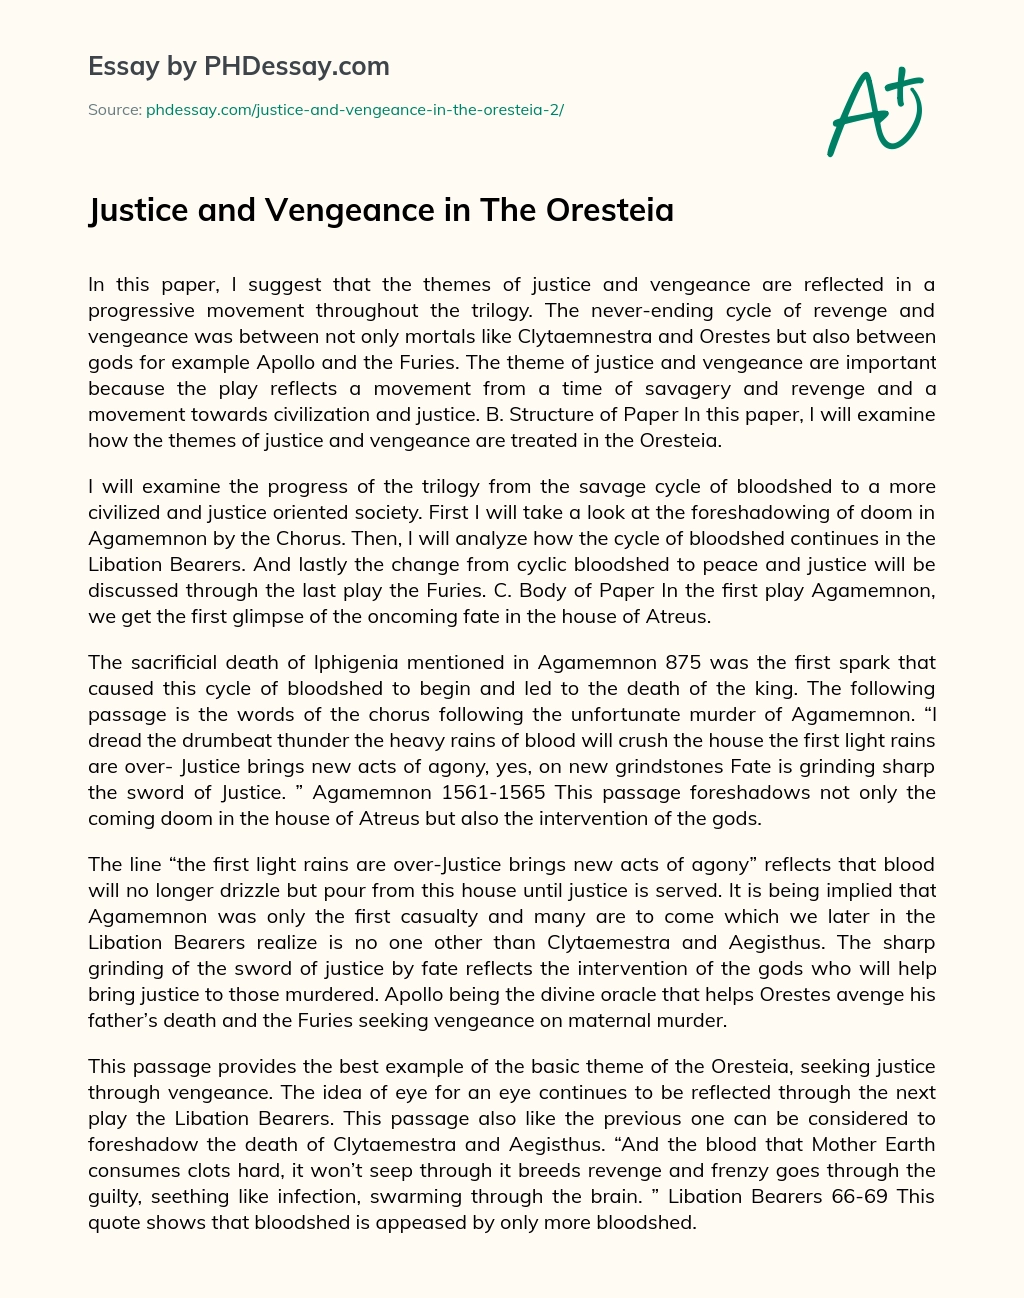 Justice and Vengeance in The Oresteia essay